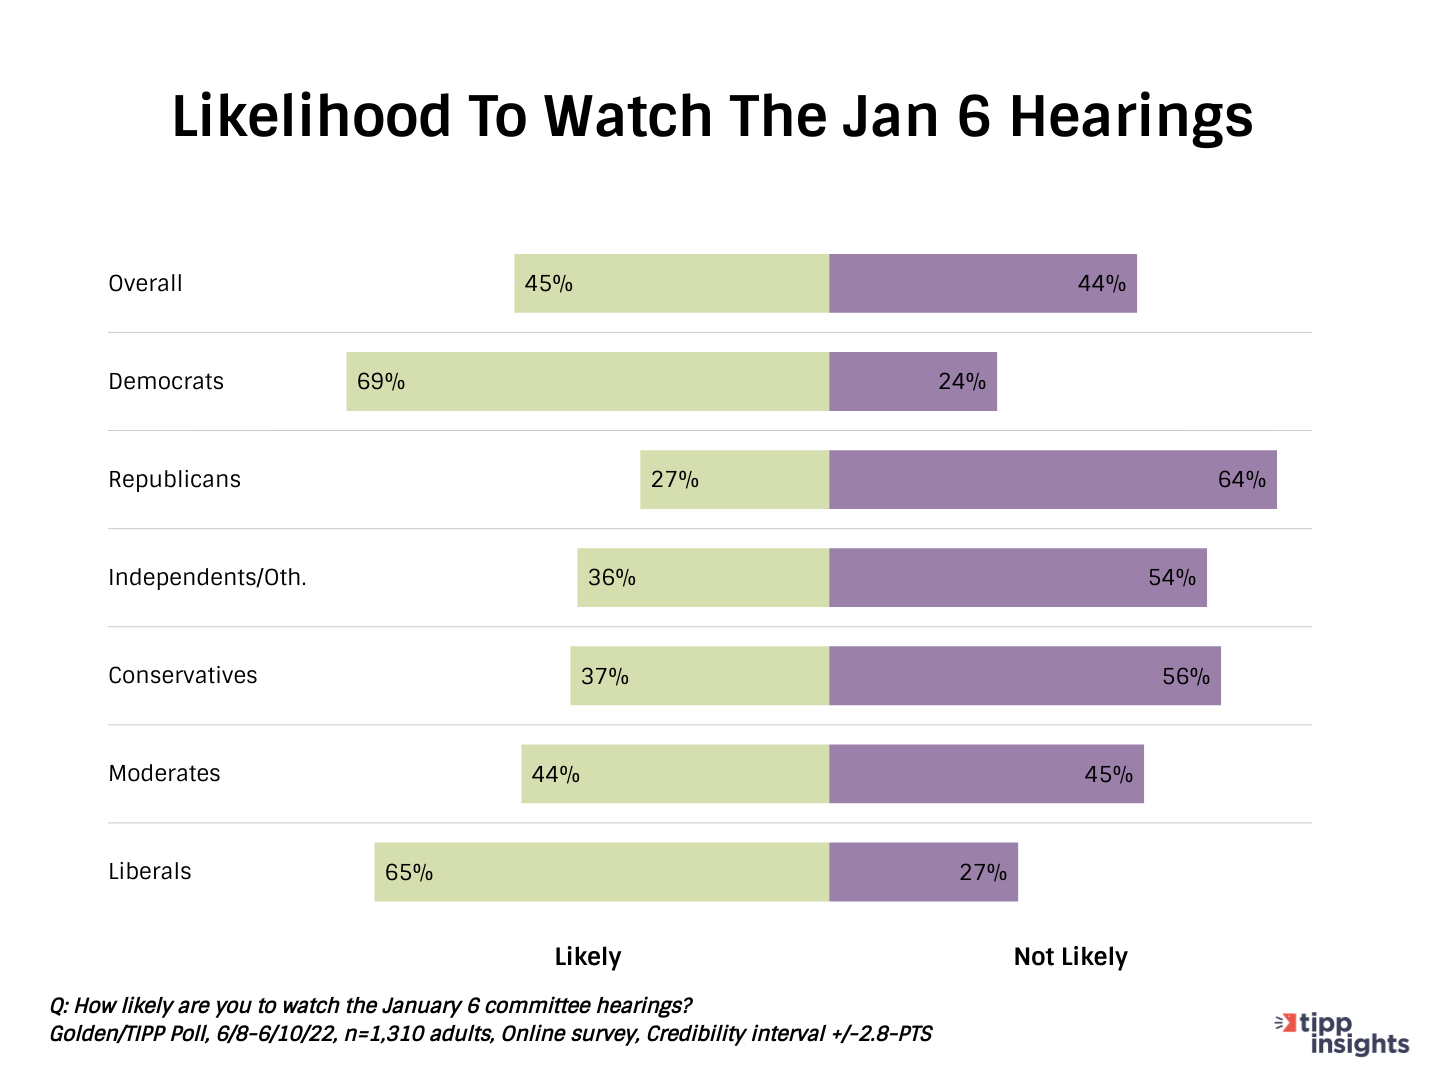 Golden/TIPP Poll Results: Likelihood of Americans to watch January 6th committee hearings? Broken down by political party and ideology